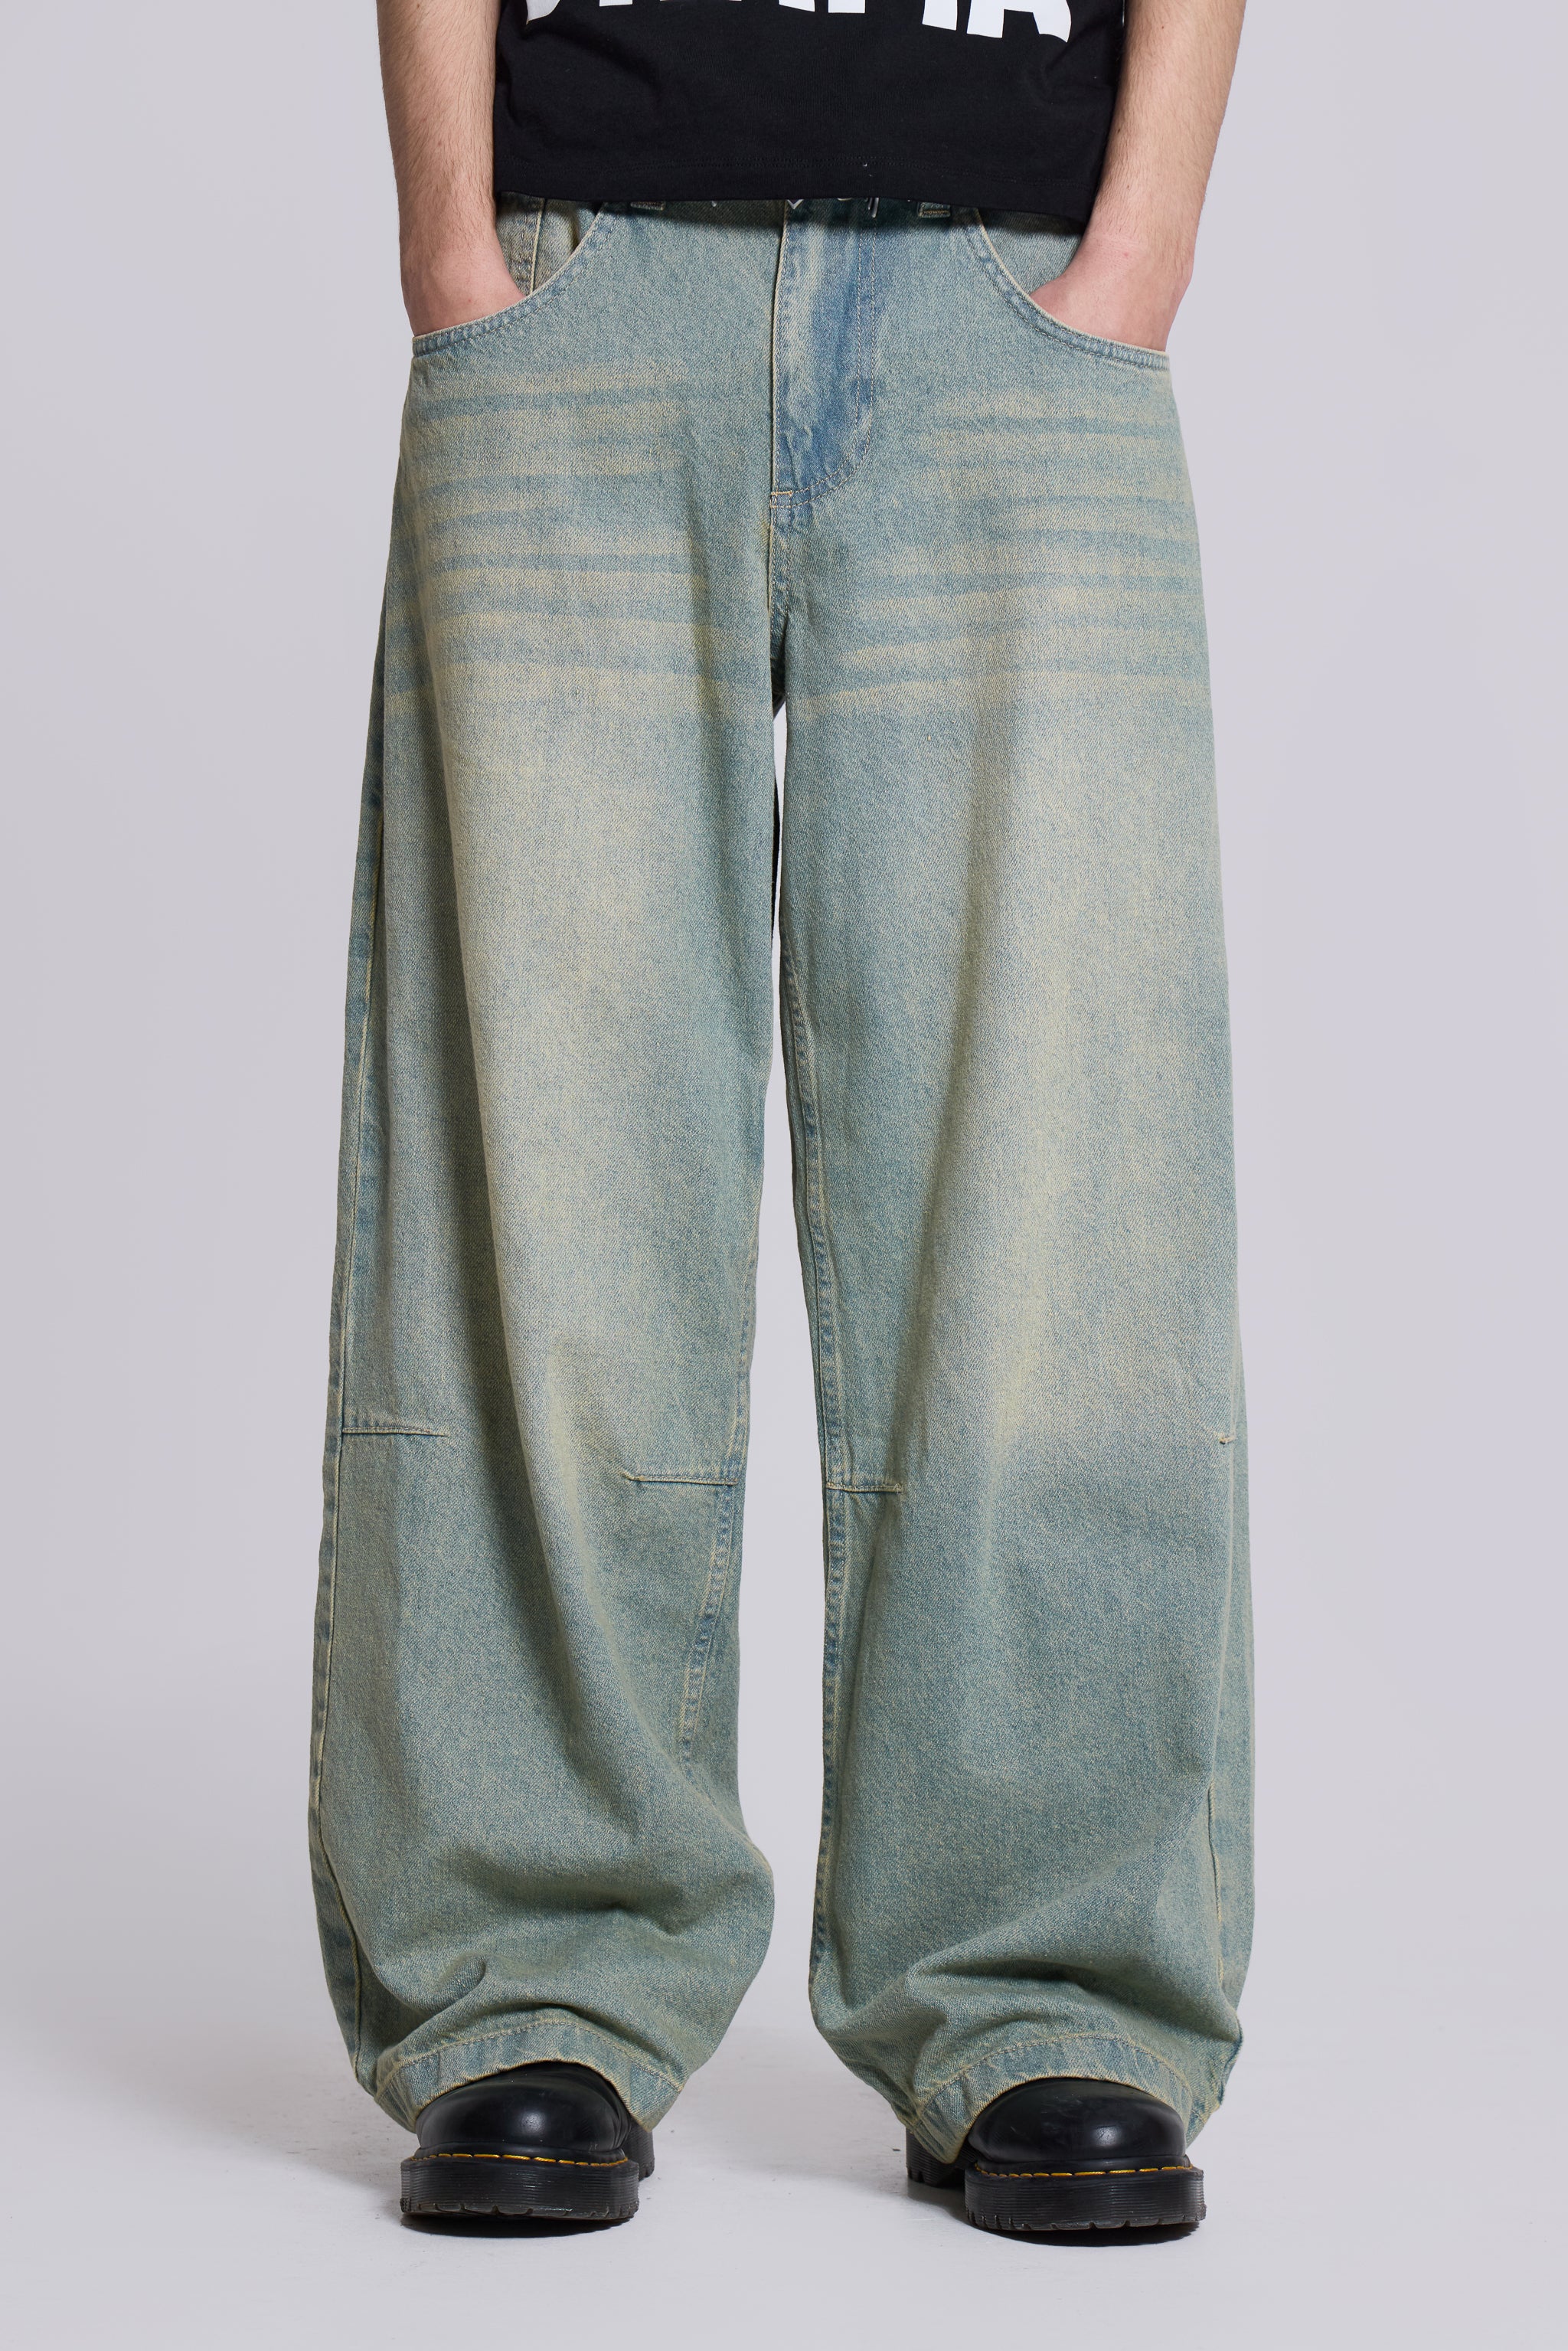 MEITO★新品/JADED LONDON/WB-COLOSSUS JEANS/32インチ